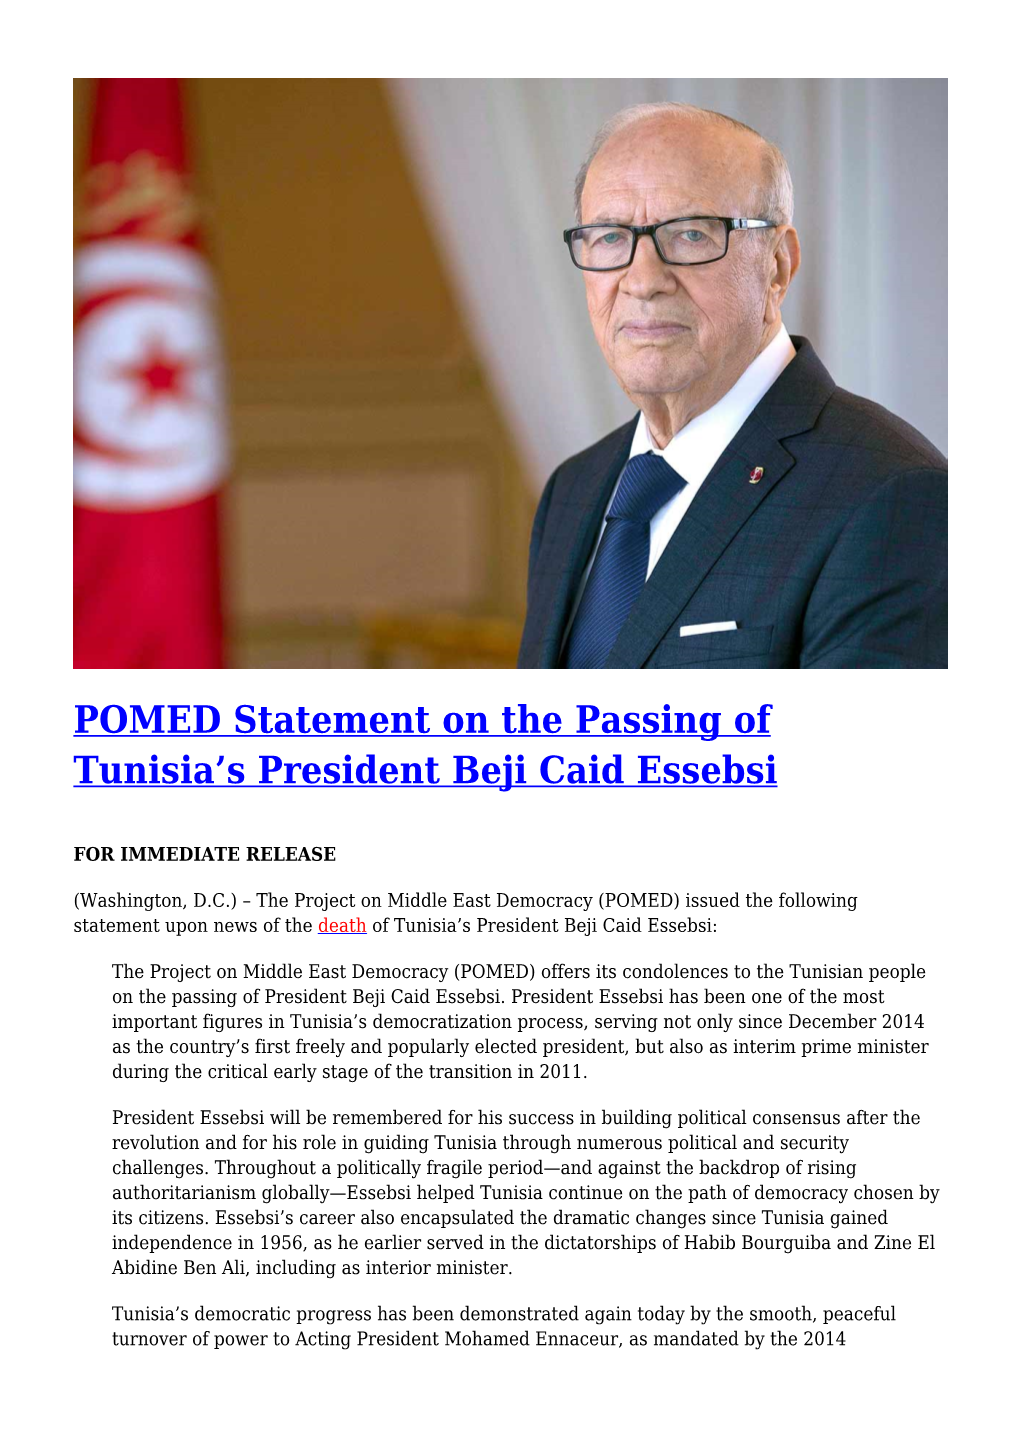 POMED Statement on the Passing of Tunisia's President Beji Caid Essebsi